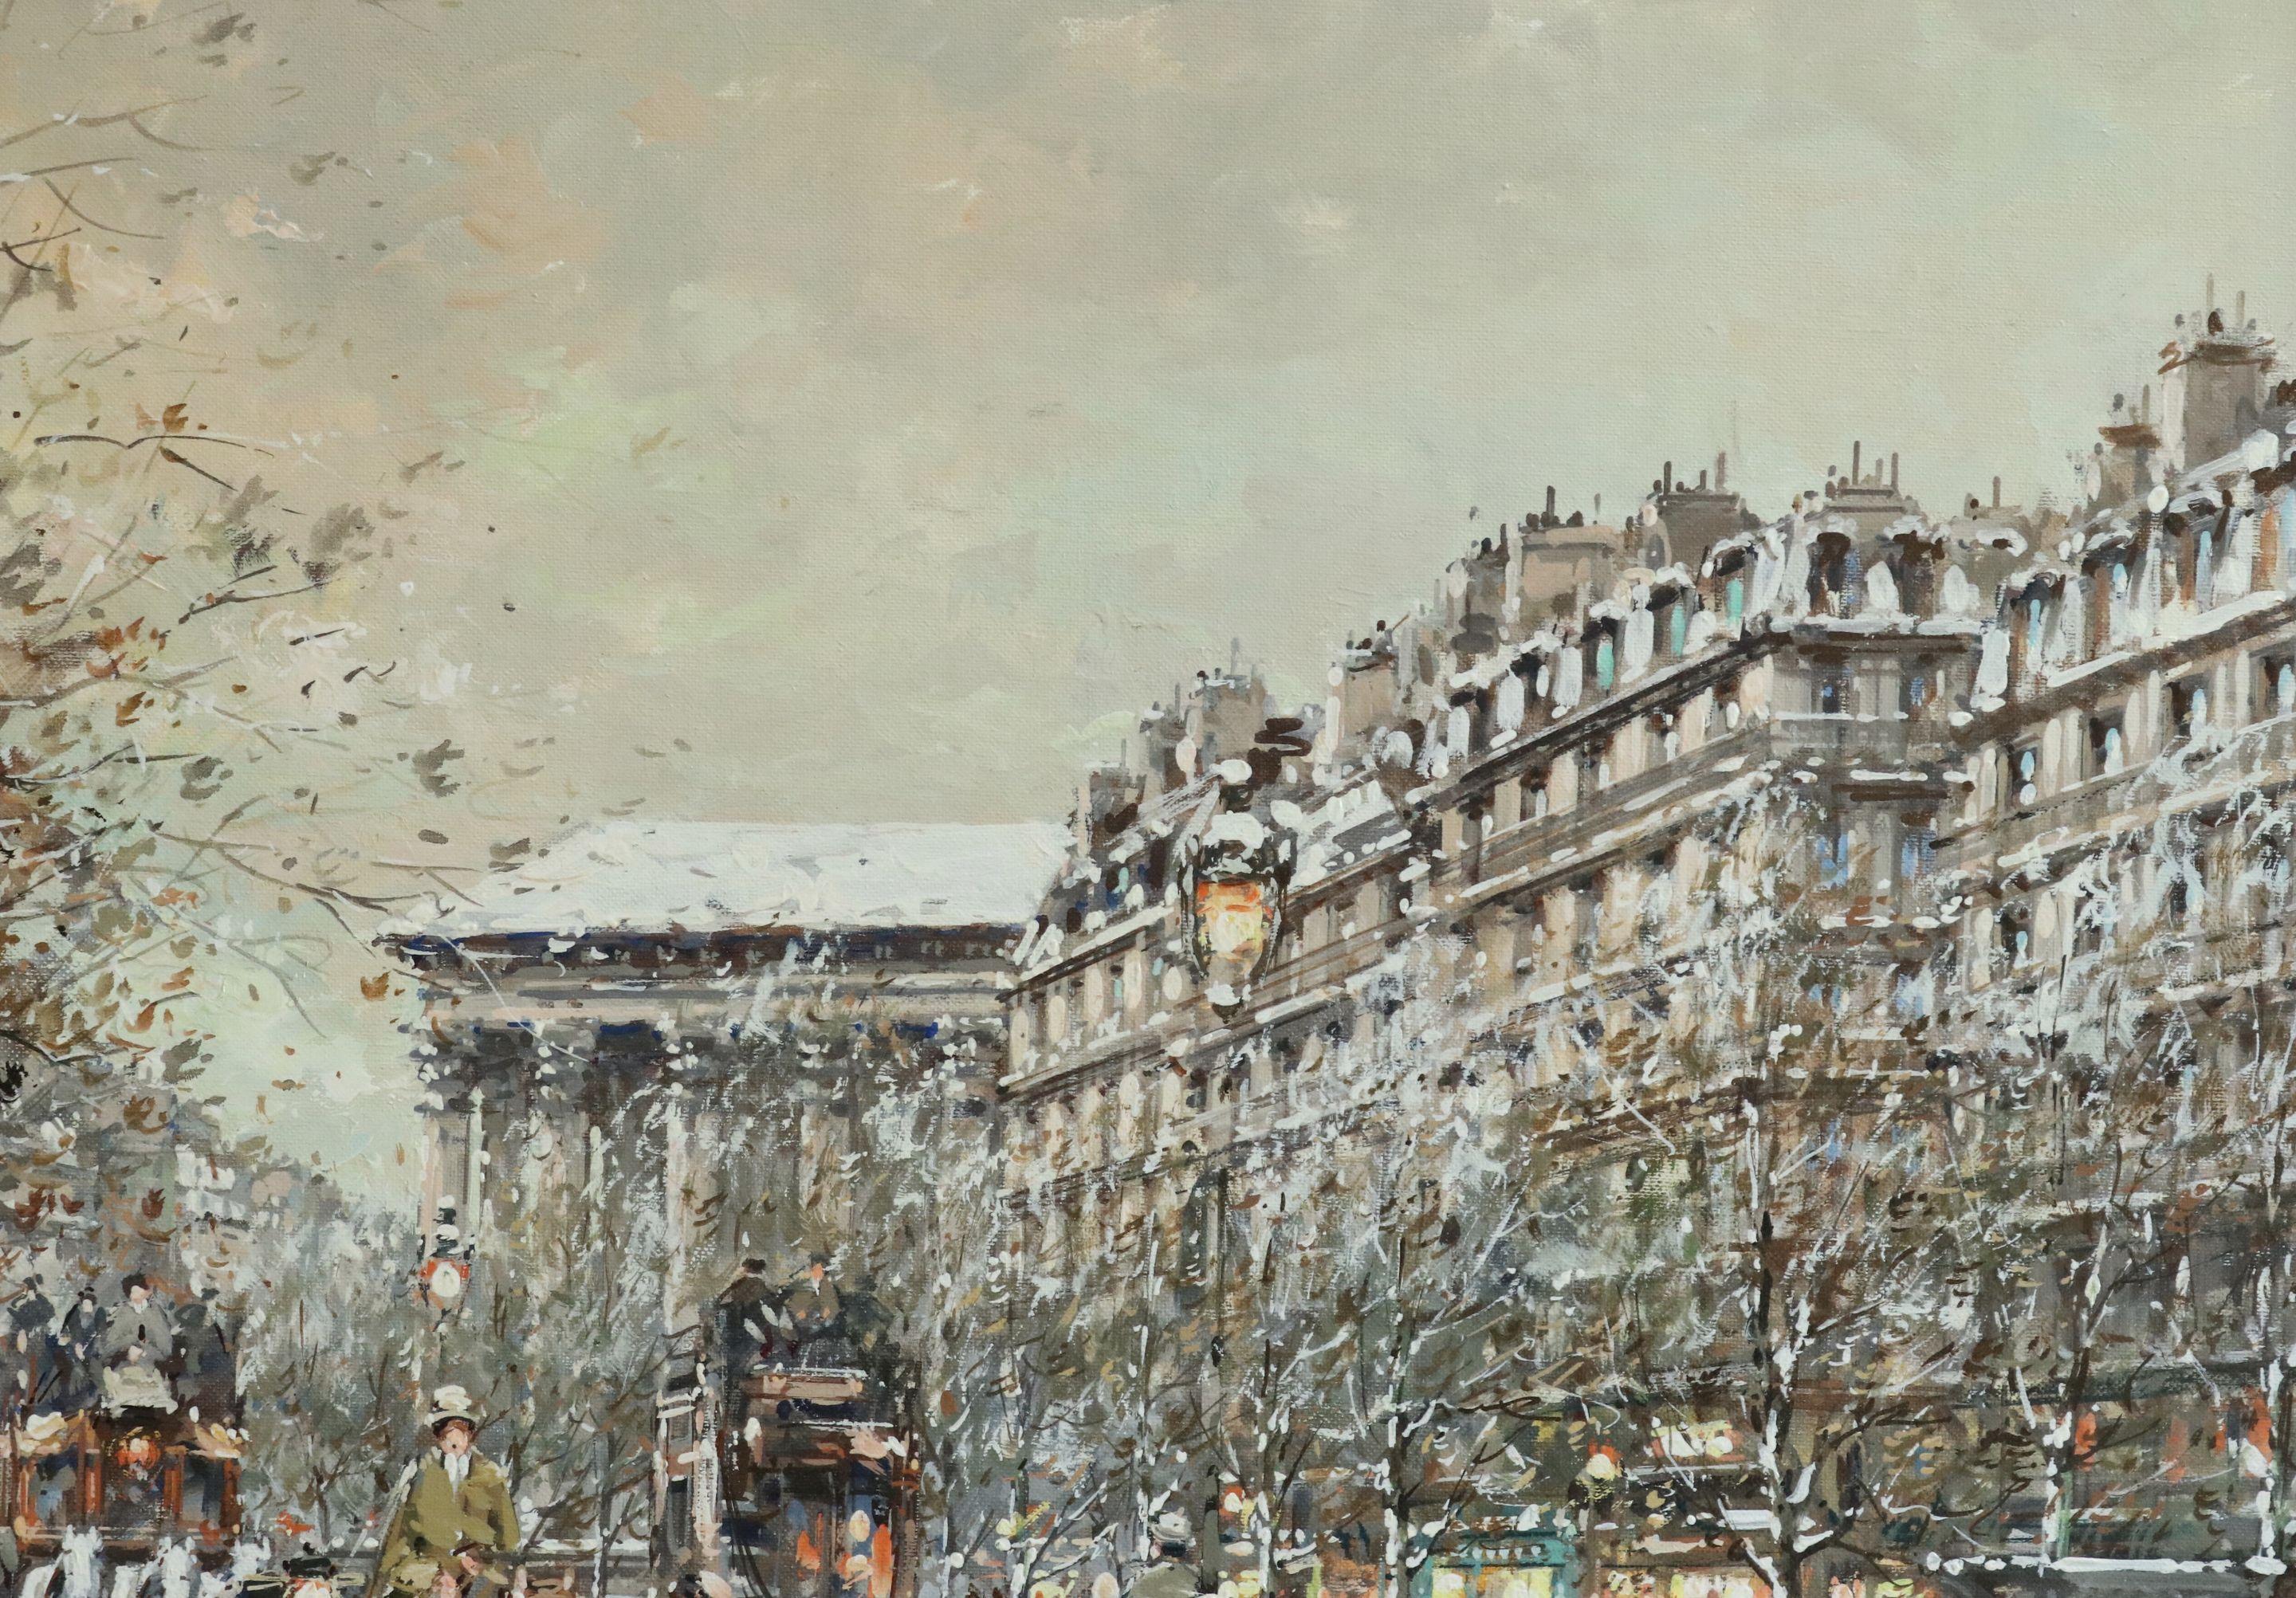 Boulevard de la Madeleine - 20th Century Oil, Figures in Cityscape by Blanchard - Brown Landscape Painting by Antoine Blanchard